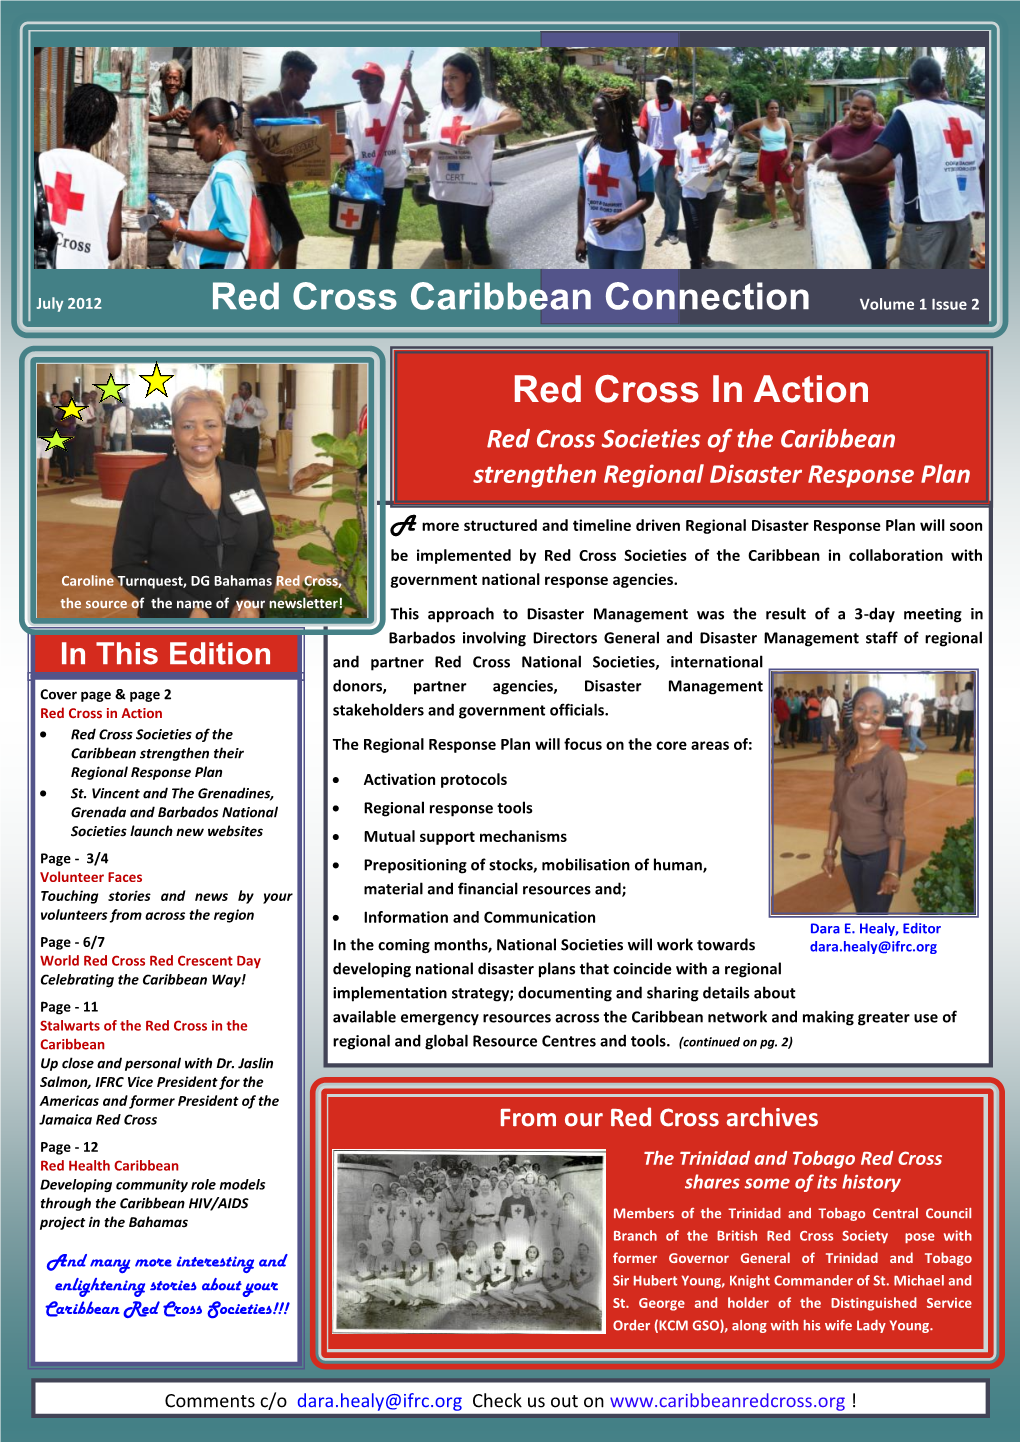 Red Cross Caribbean Connection Volume 1 Issue 2